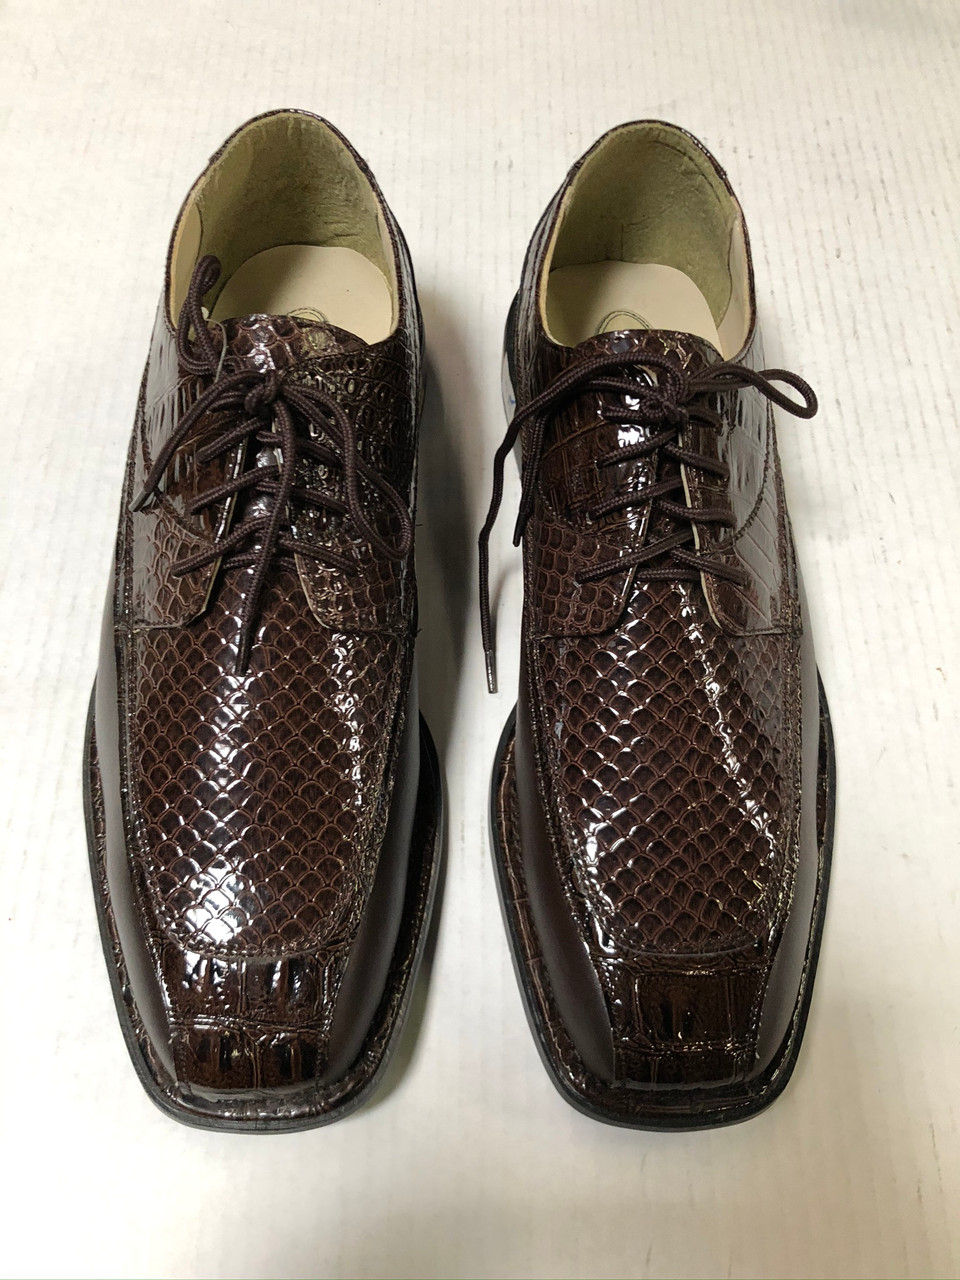 *ULTIMATE* Men’s Shiny Brown WIDE Exotic Print Hot Toe Dress Shoes FREE ...